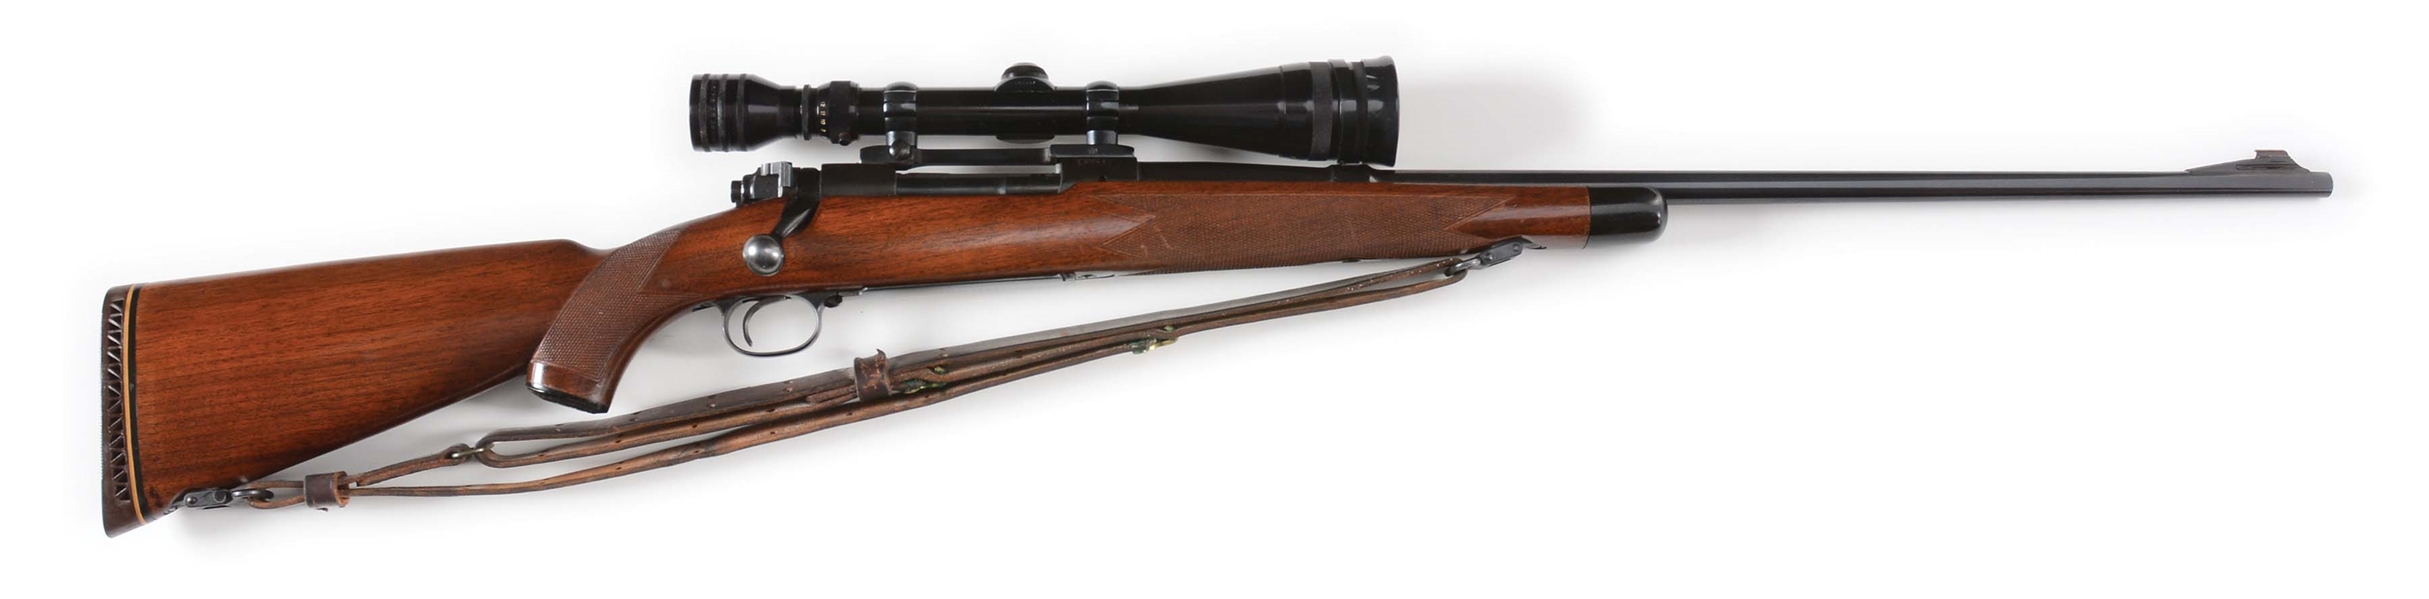 (C) WINCHESTER MODEL 70 SUPER GRADE BOLT ACTION RIFLE WITH SCOPE (1950).